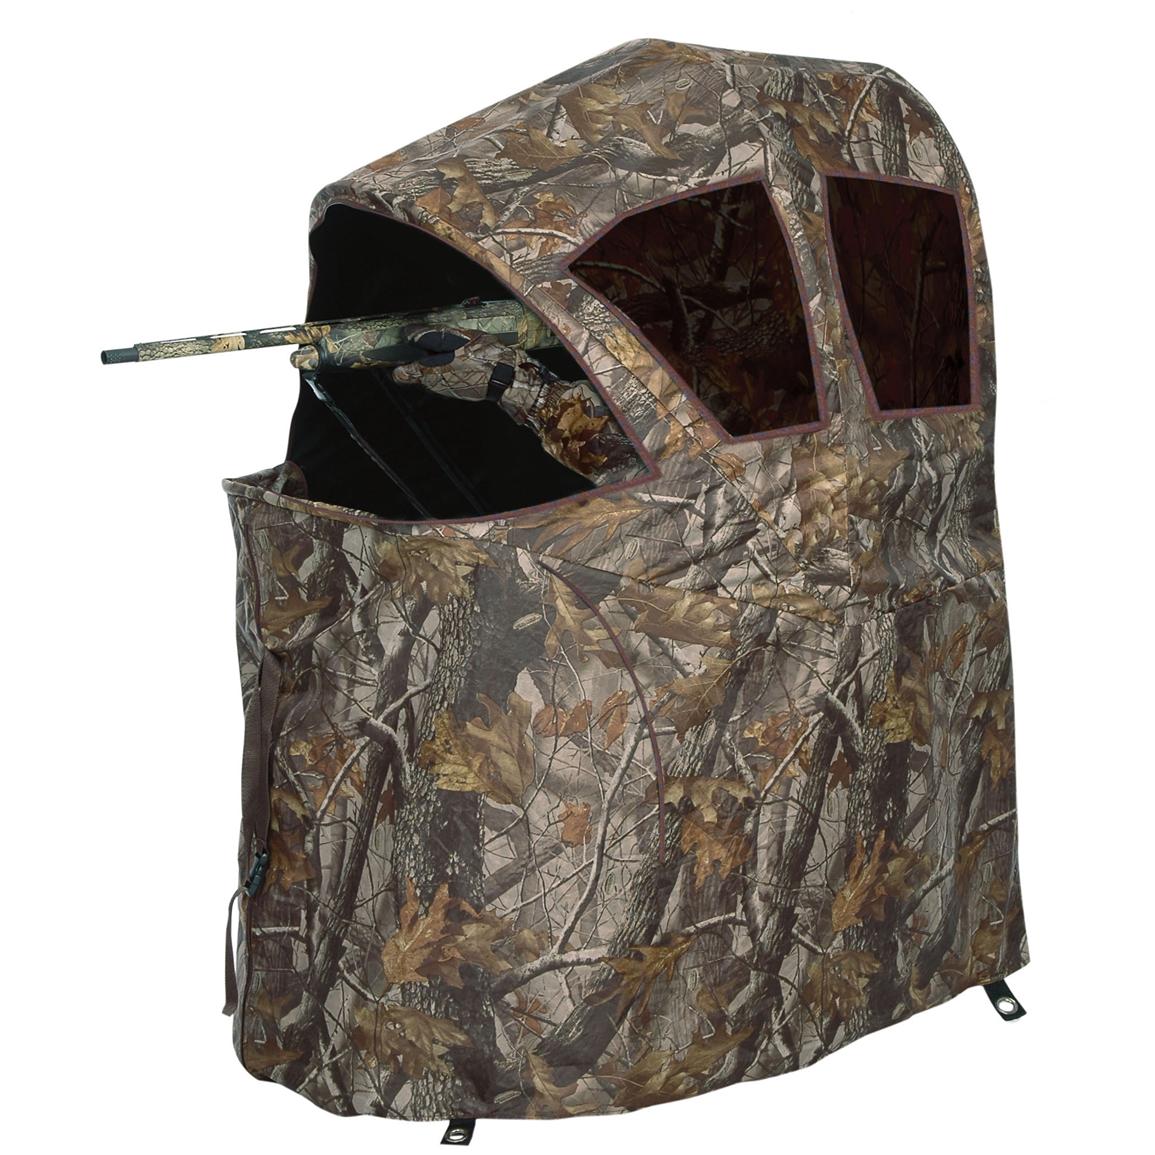 Ameristep® Chair Blind - 138346, Ground Blinds at Sportsman's Guide